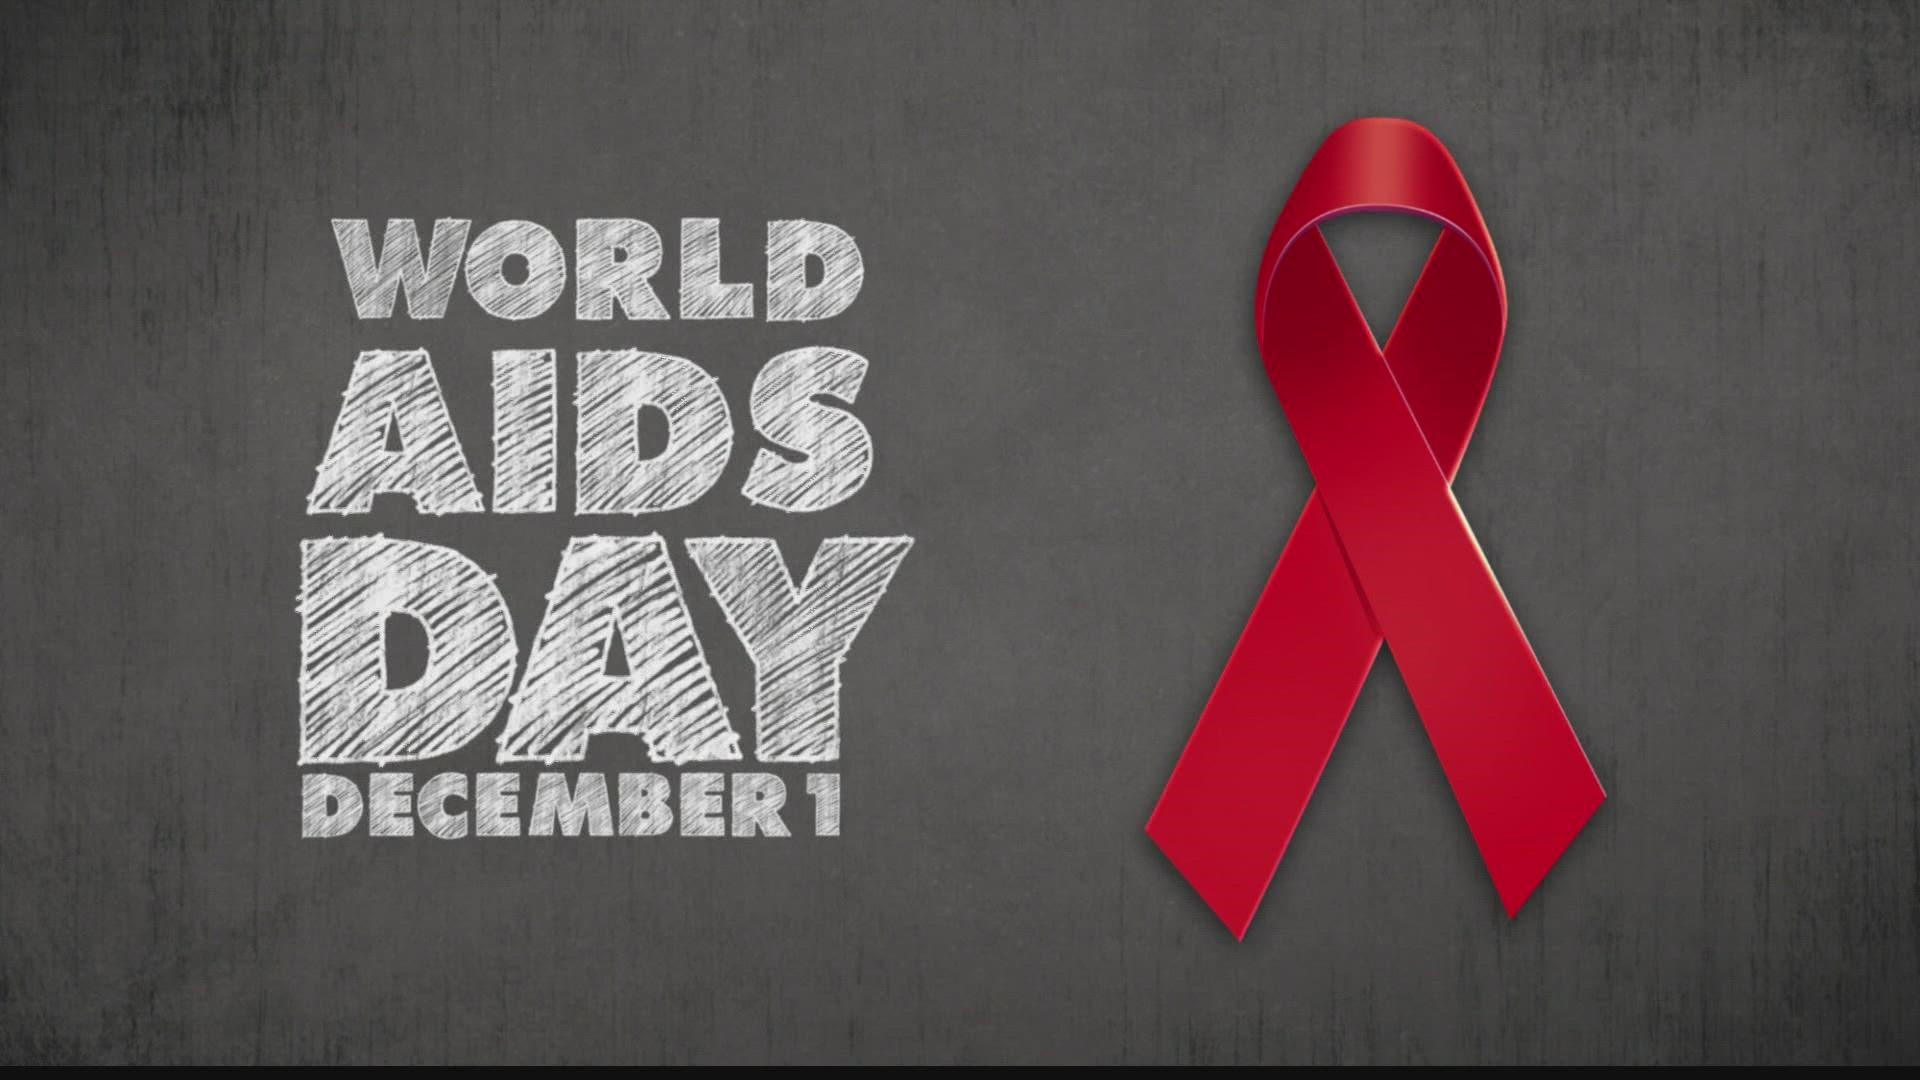 According to the Alabama Department of Public Health, World AIDS Day was first recognized in 1988.